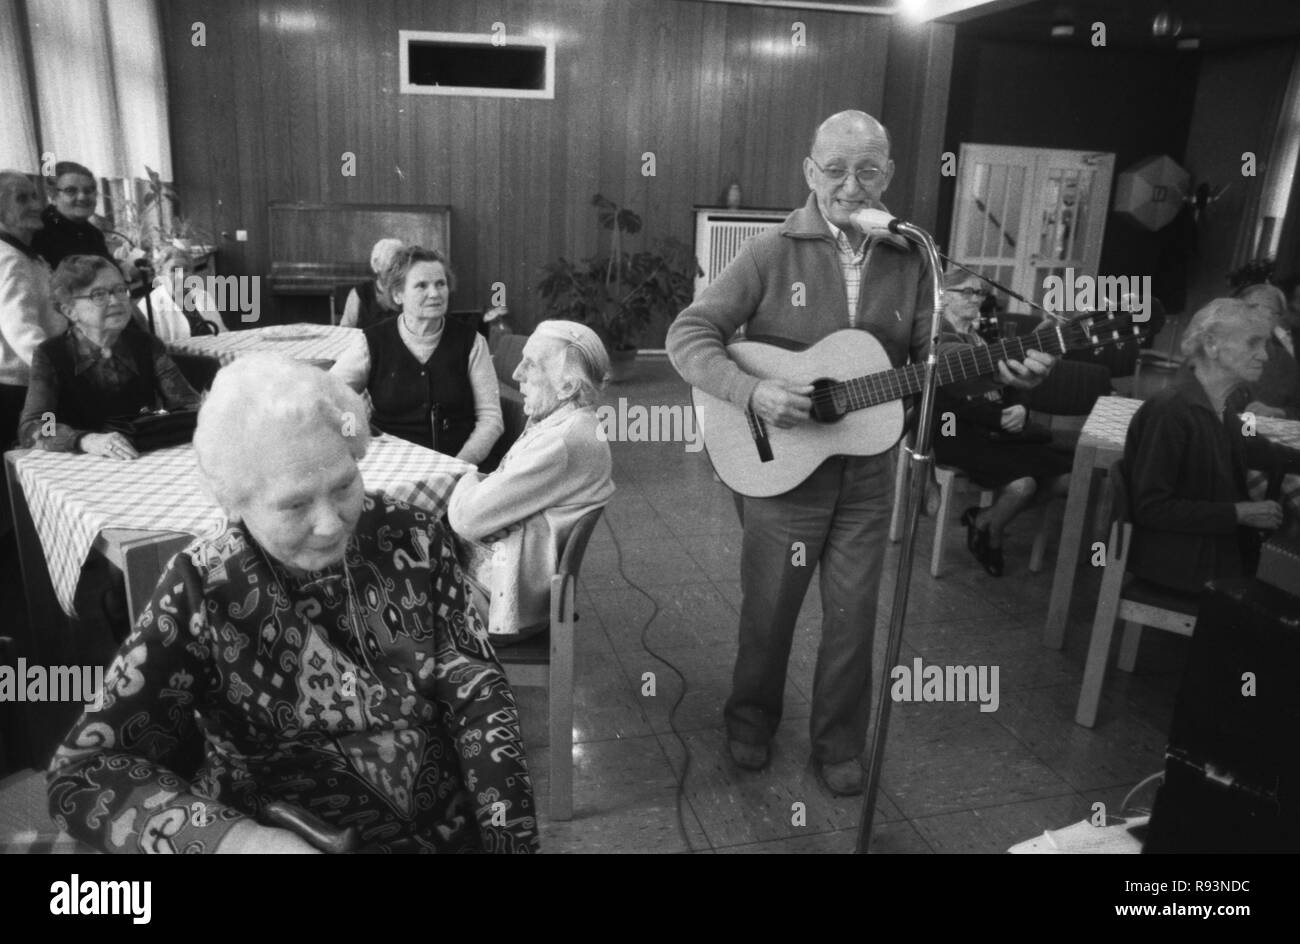 Members of the Senioren-Schutz-Bund (Senior Protection Federation), also known as 'Graue Panther' (Grey Panther), entertain the residents of a retirement home in Hagen on 17 March 1980. | usage worldwide Stock Photo